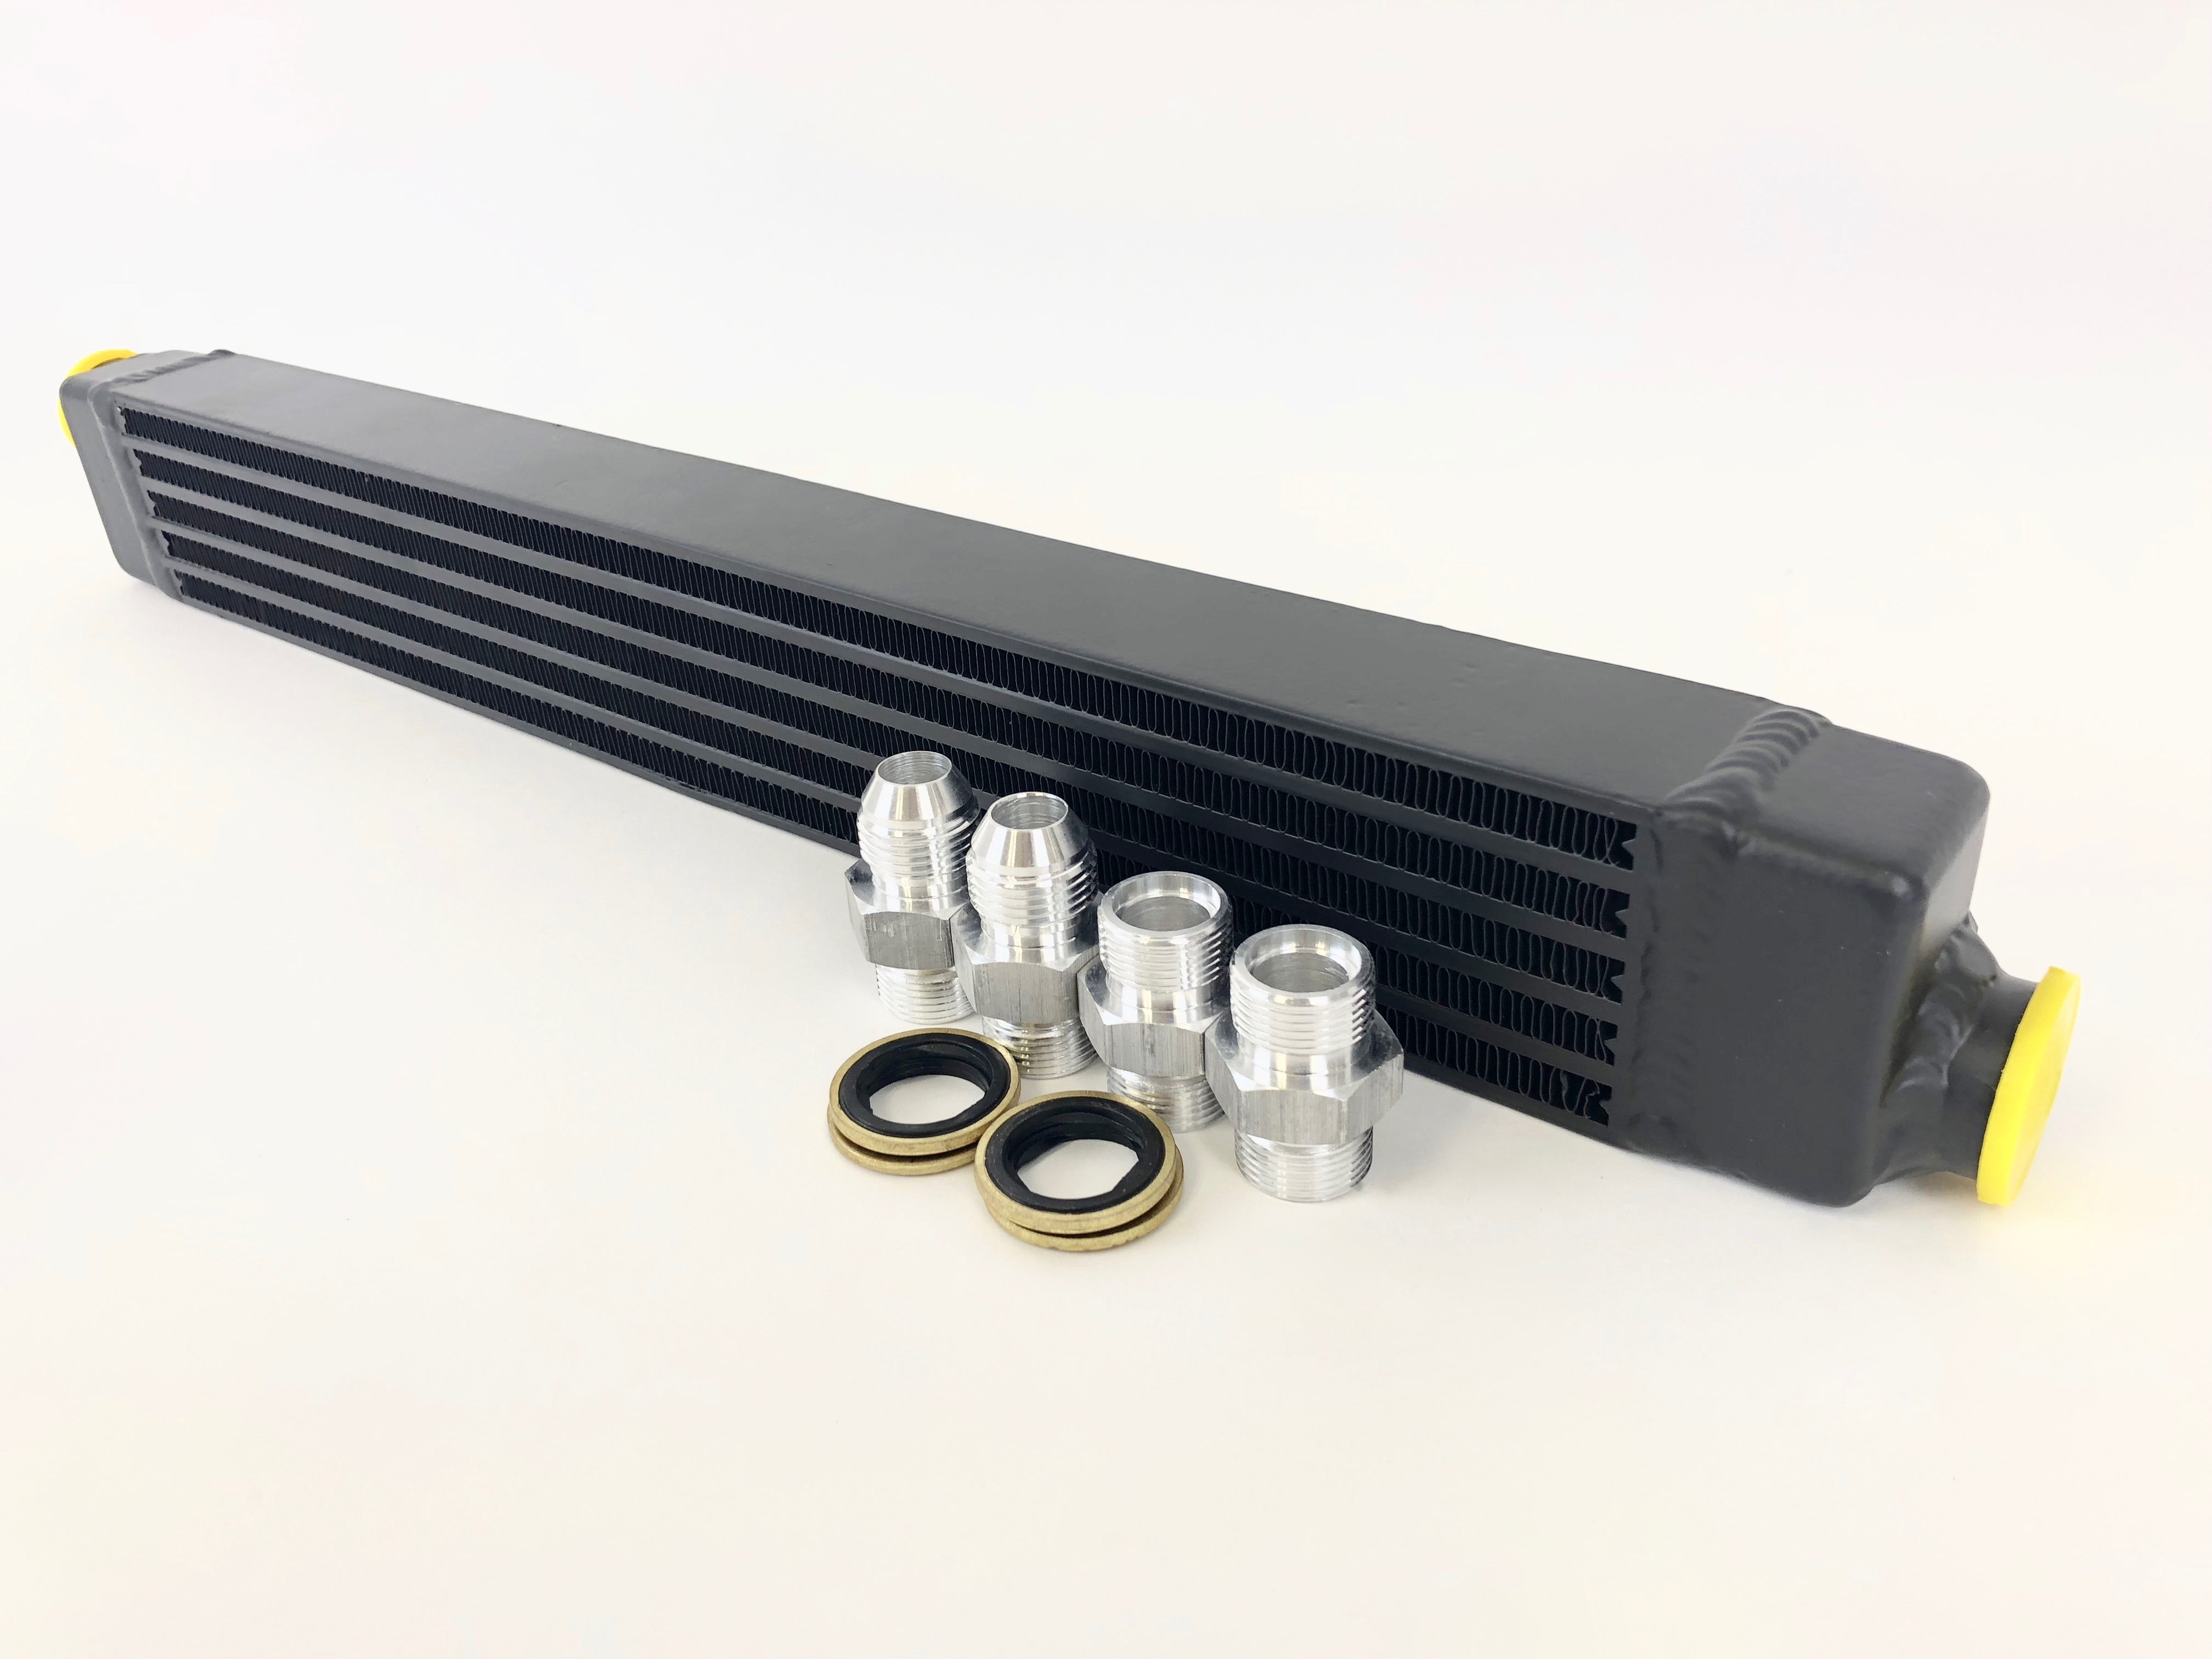 CSF 8092 BMW E30 high performance Oil Cooler w/adjustable fittings for OEM style and AN-10 male connections Photo-0 